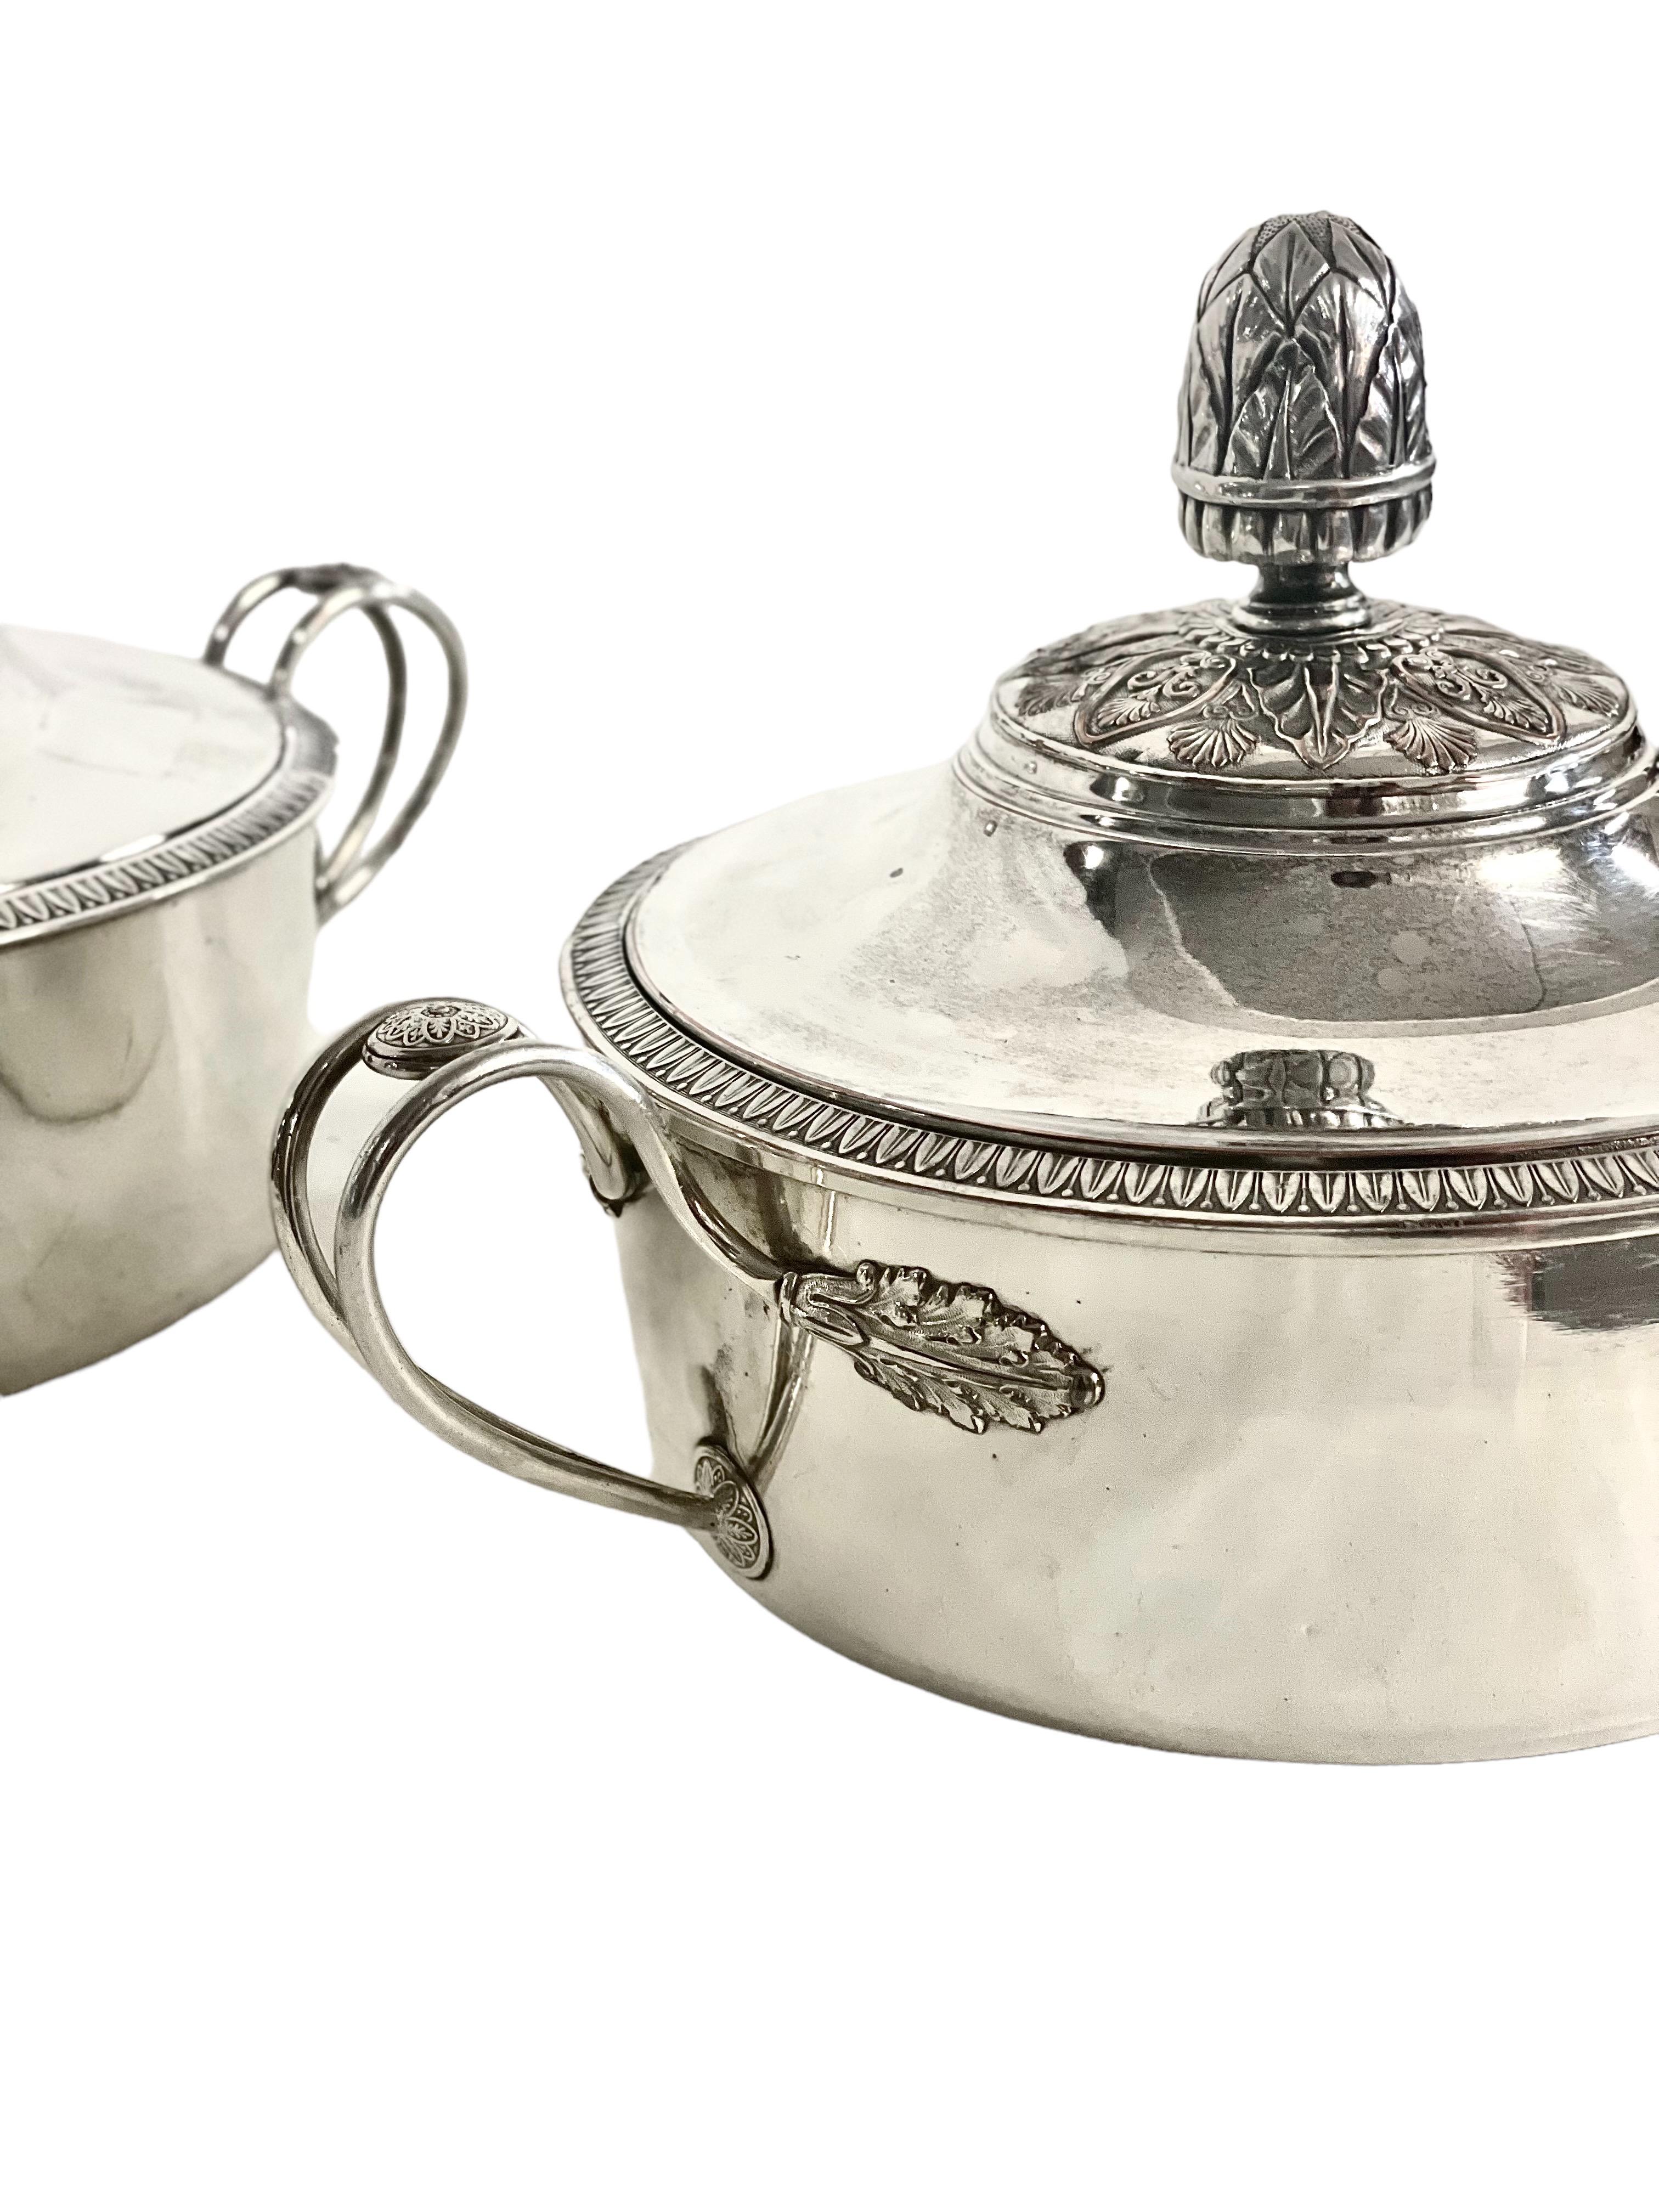 An excellent pair of antique silver-plated vegetable or soup tureens, circular in shape and with wonderful, ornamental side handles, which cling to the body of the dish in the form of extravagant acanthus fronds. 
The close-fitting lids are finely